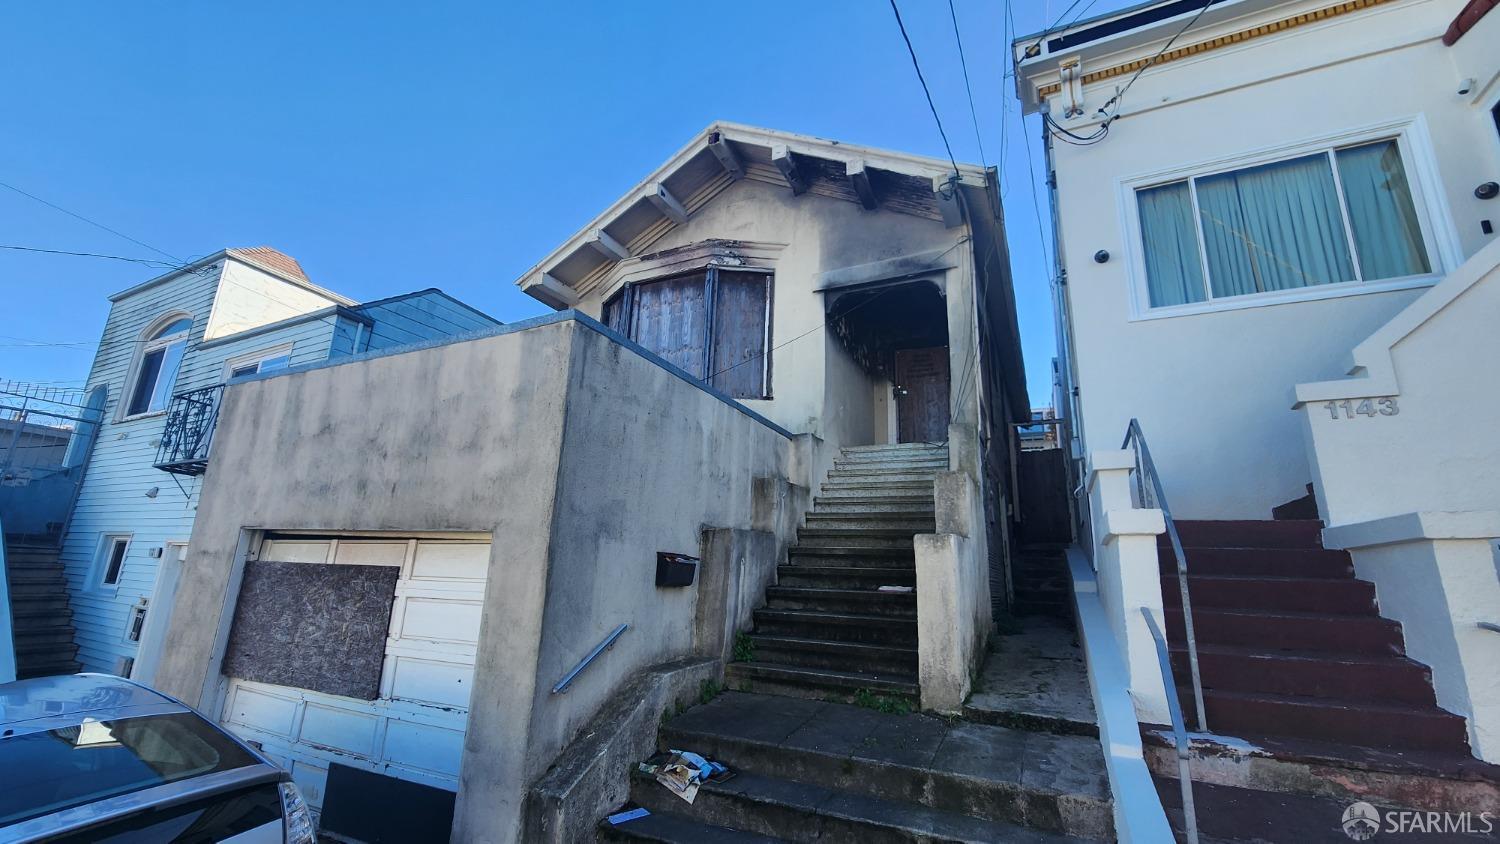 Photo of 1137 Hanover St in Daly City, CA